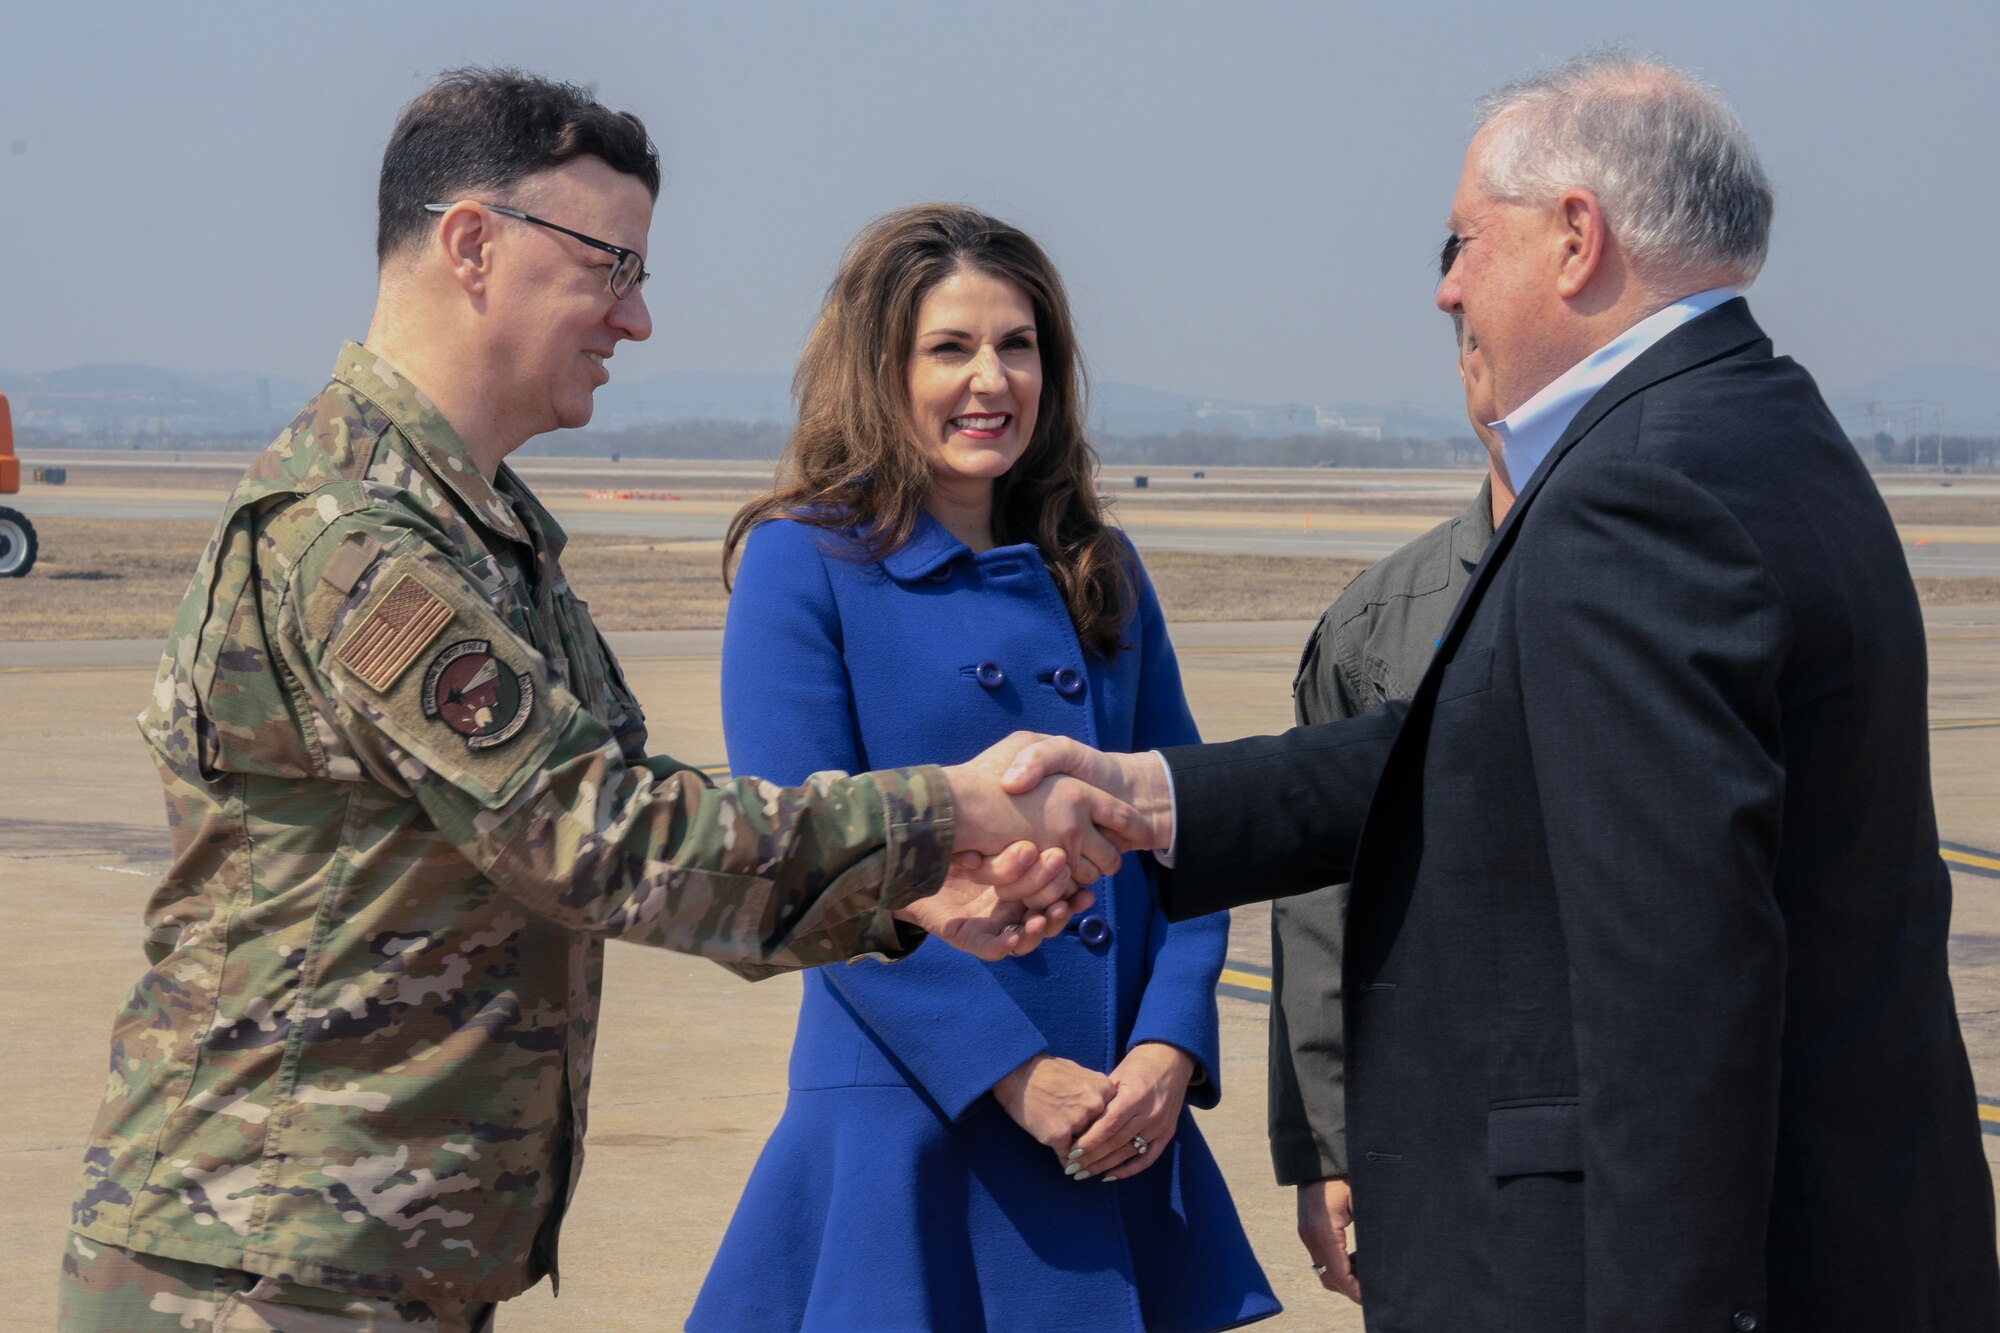 U.S. Air Force Chief Master Sgt. David Weaver, 51st Fighter Wing interim command chief, shakes hands with Secretary of the Air Force Frank Kendall at Osan Air Base, Republic of Korea, March 19, 2023.